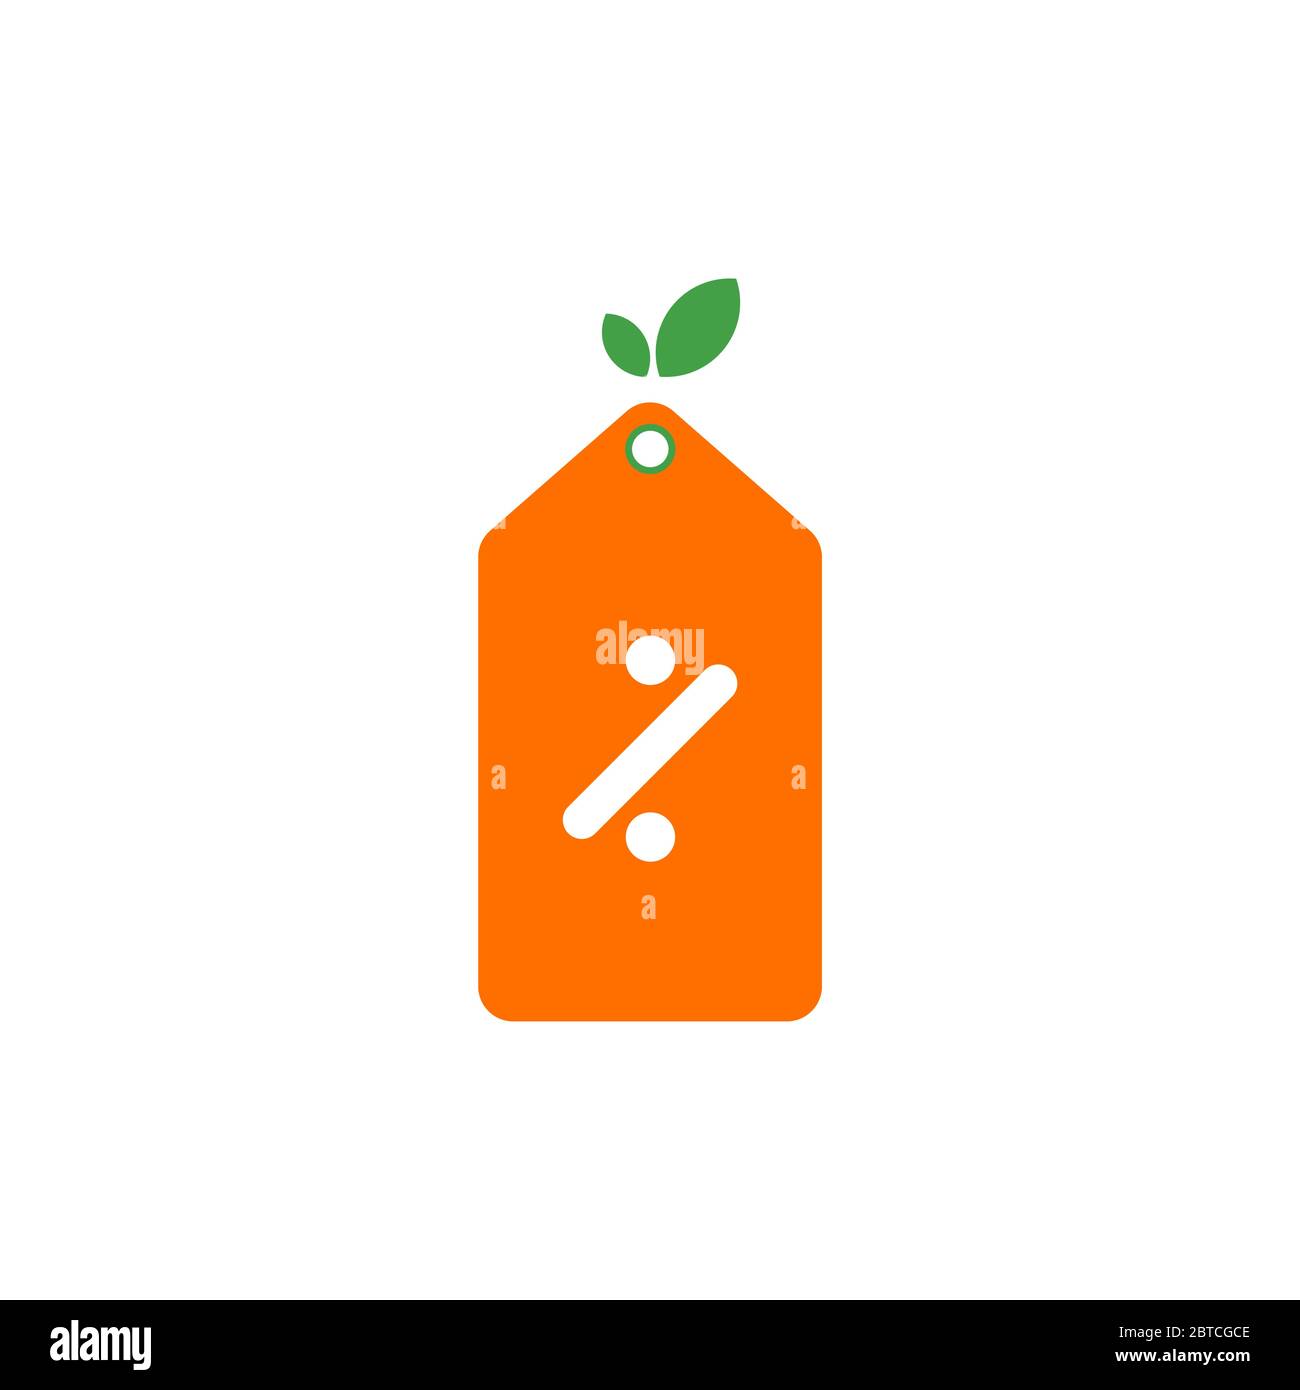 price tag fruit vector design template illustration Stock Vector